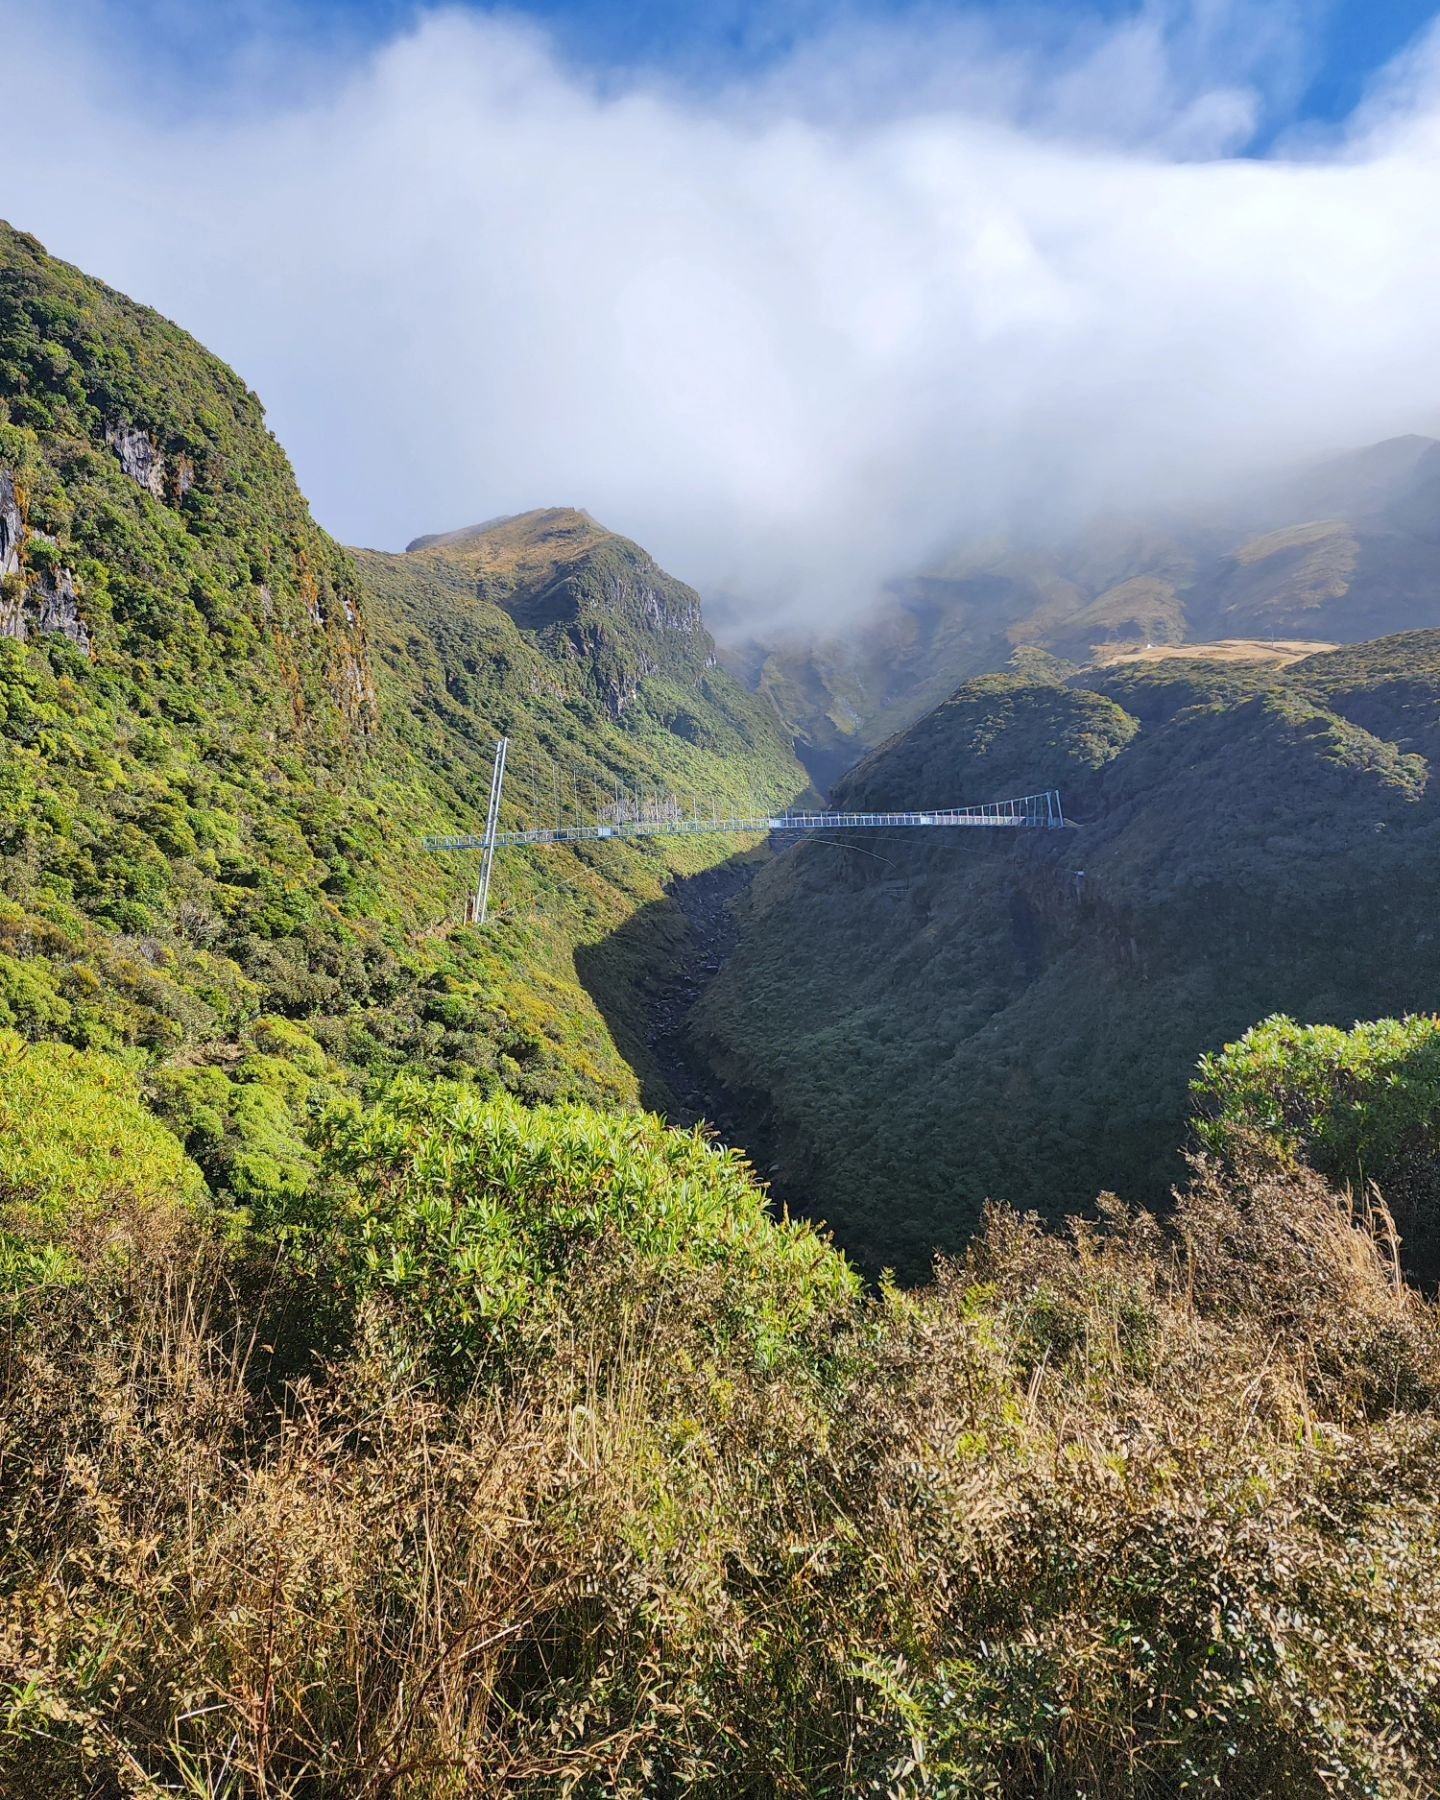 🍂A few deliveries in Stratford and a meeting at the Library today. 

⛰️We utilized the trip by taking a short tramp up Mt Taranaki to have a look at the new bridge! 

🌤As you can see by the photos the weather changed quickly while we were there! Bl